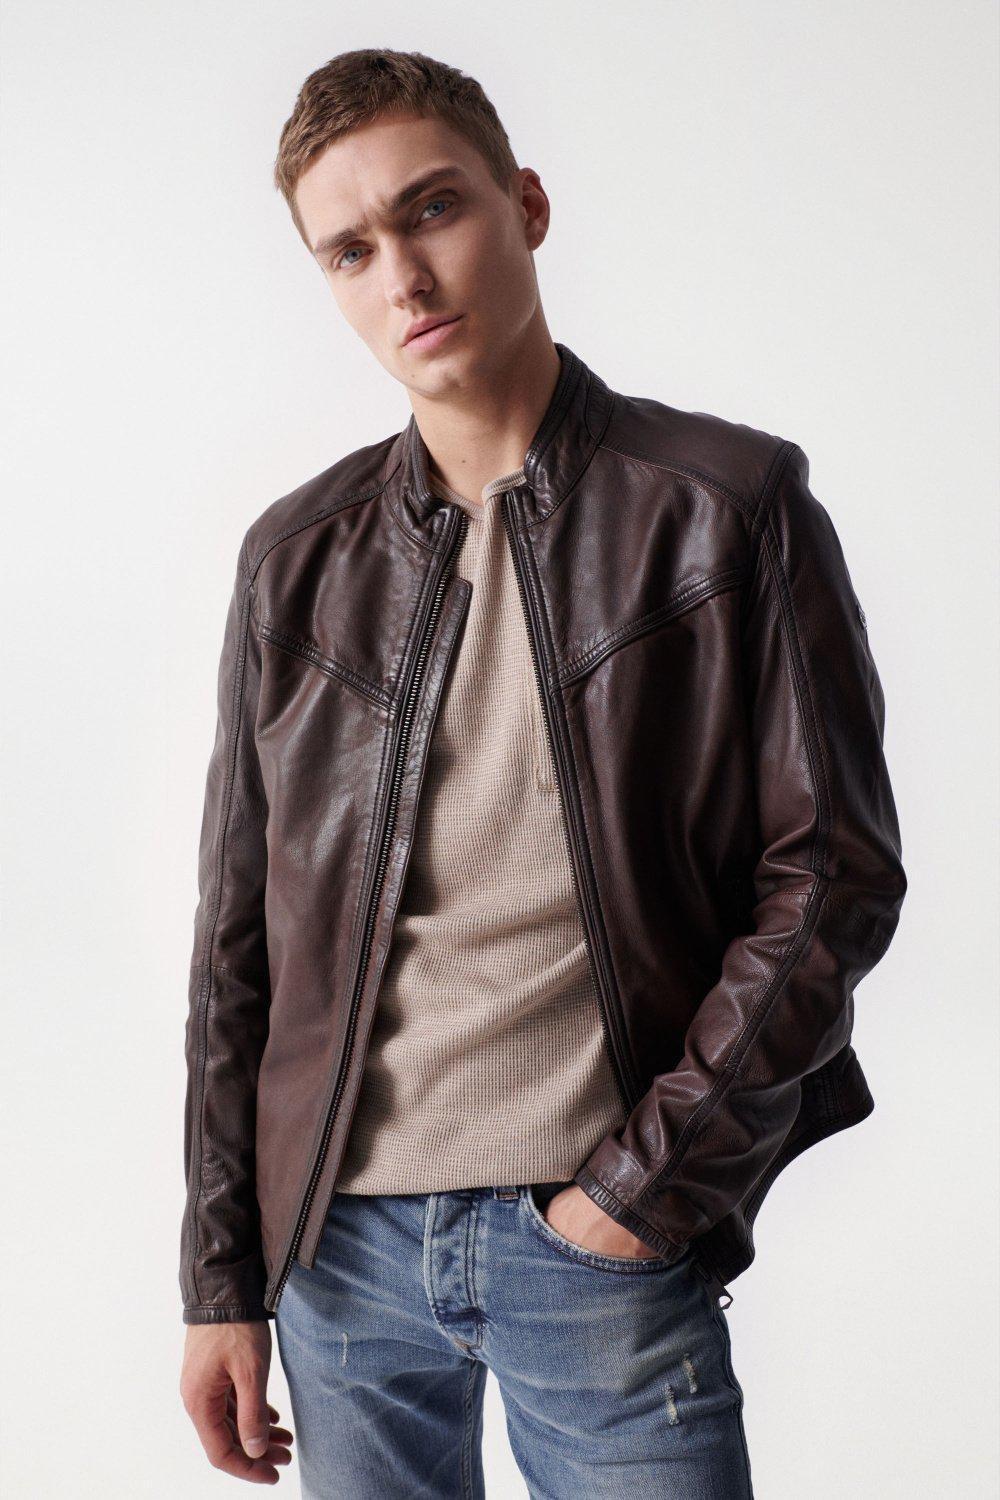 Salsa Jeans - Brown Leather Jacket